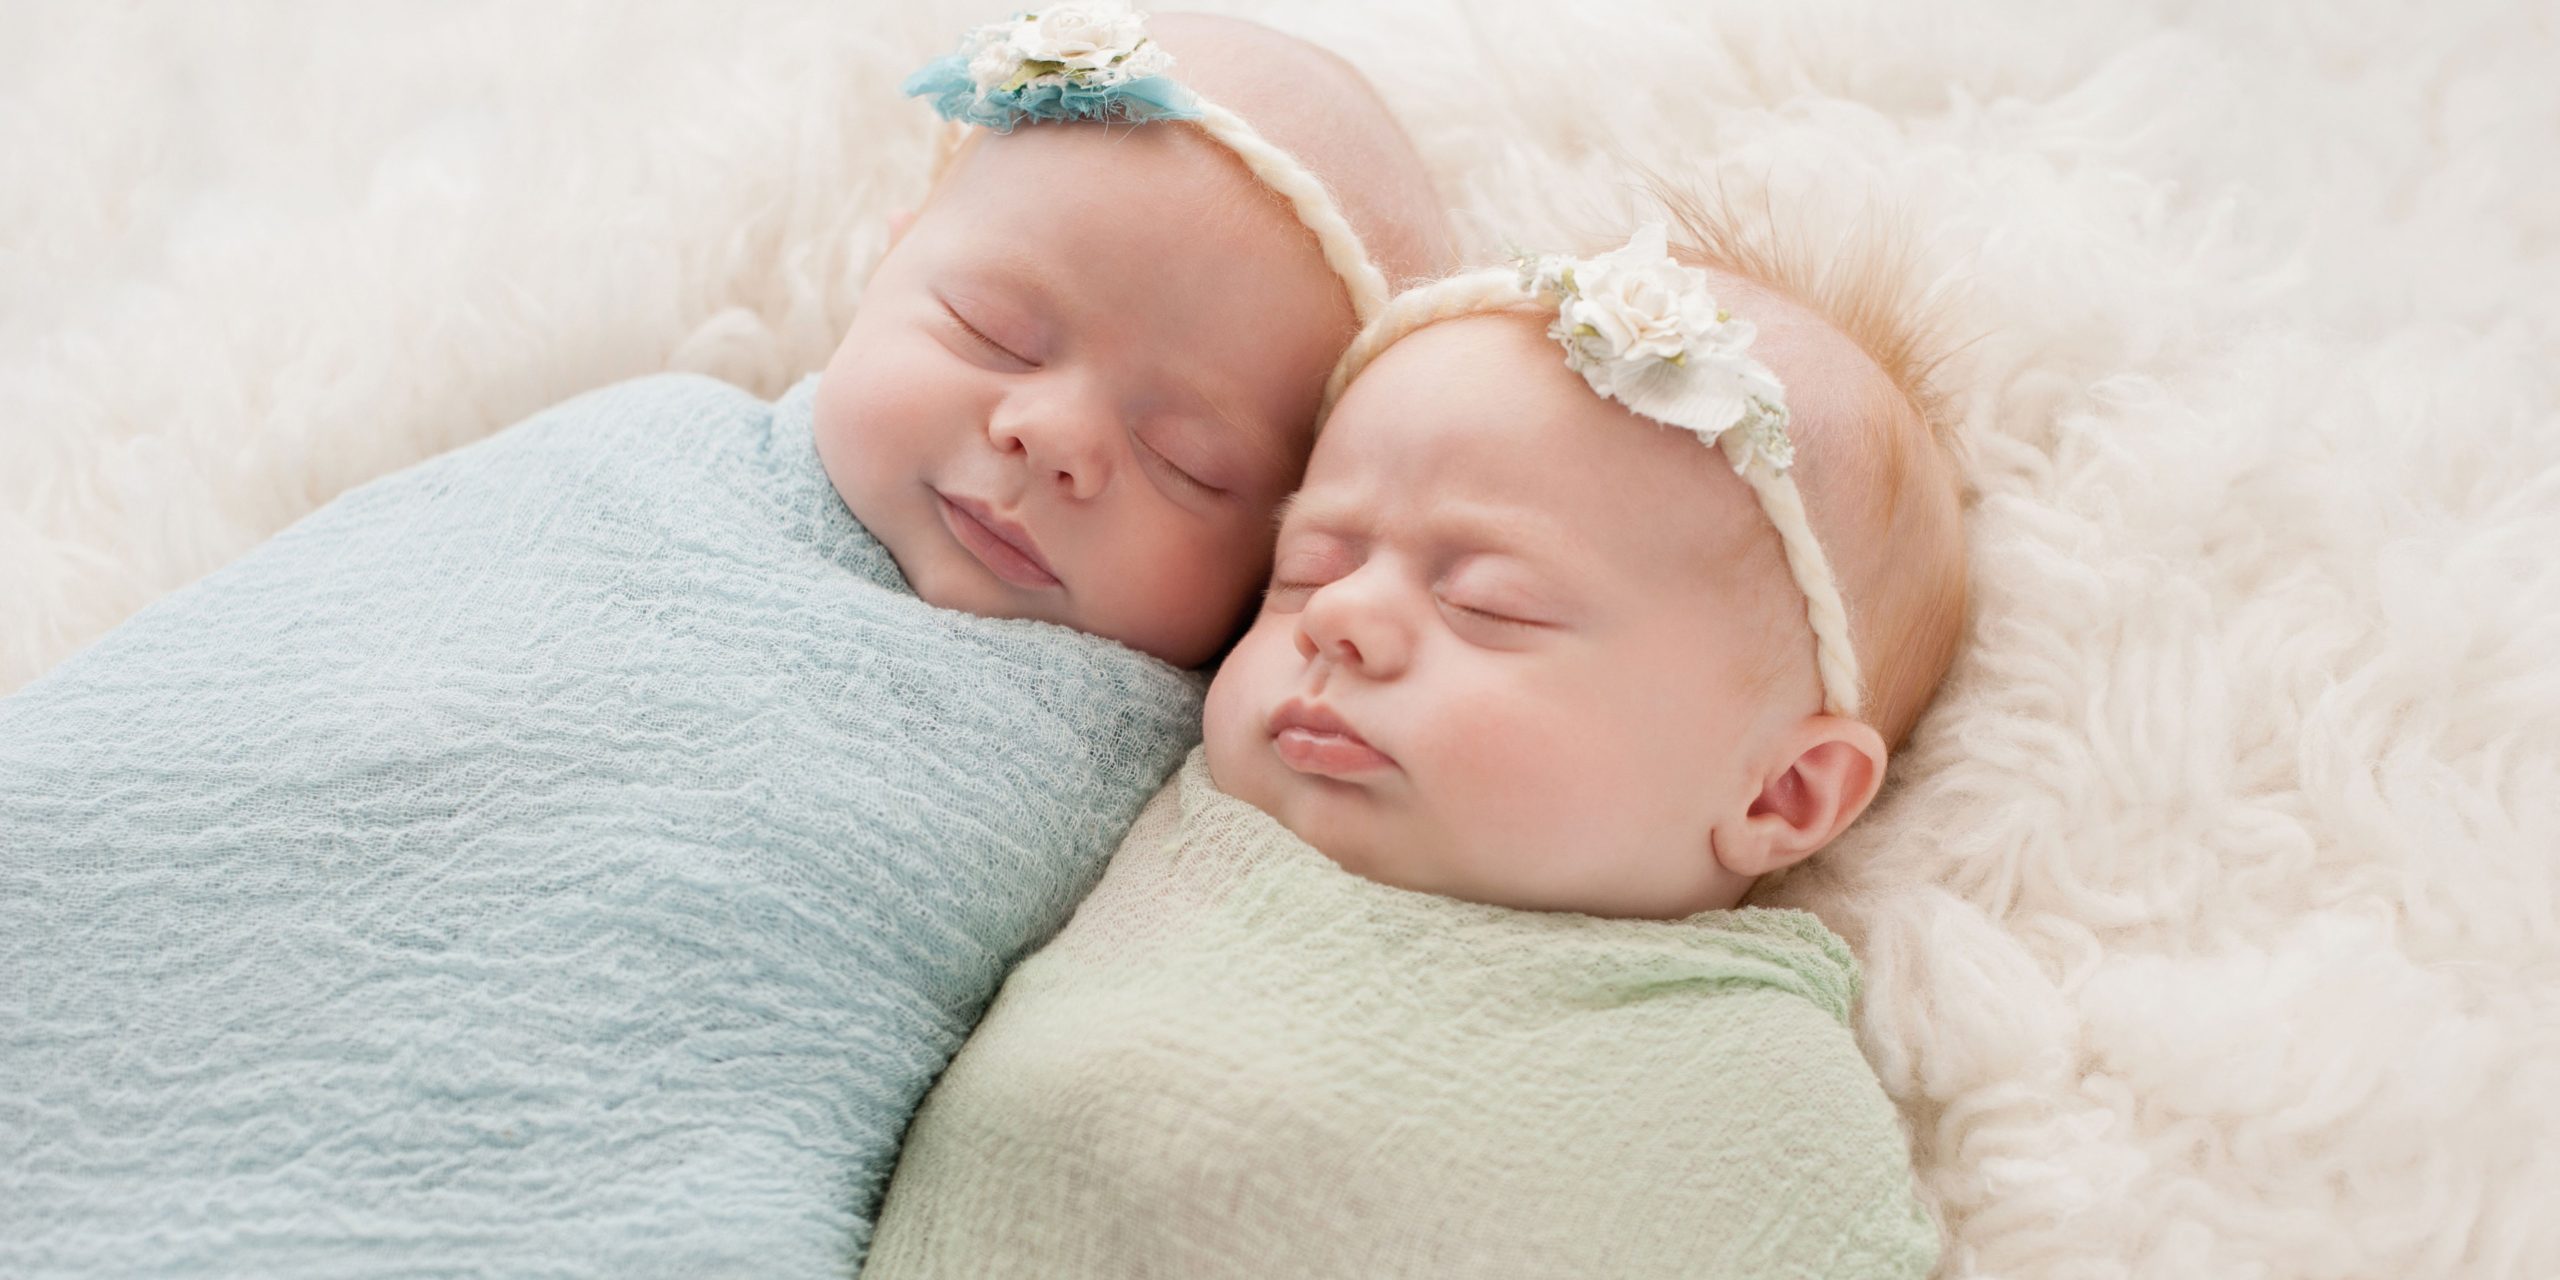 Does IVF Increase The Chances Of Having Twins?